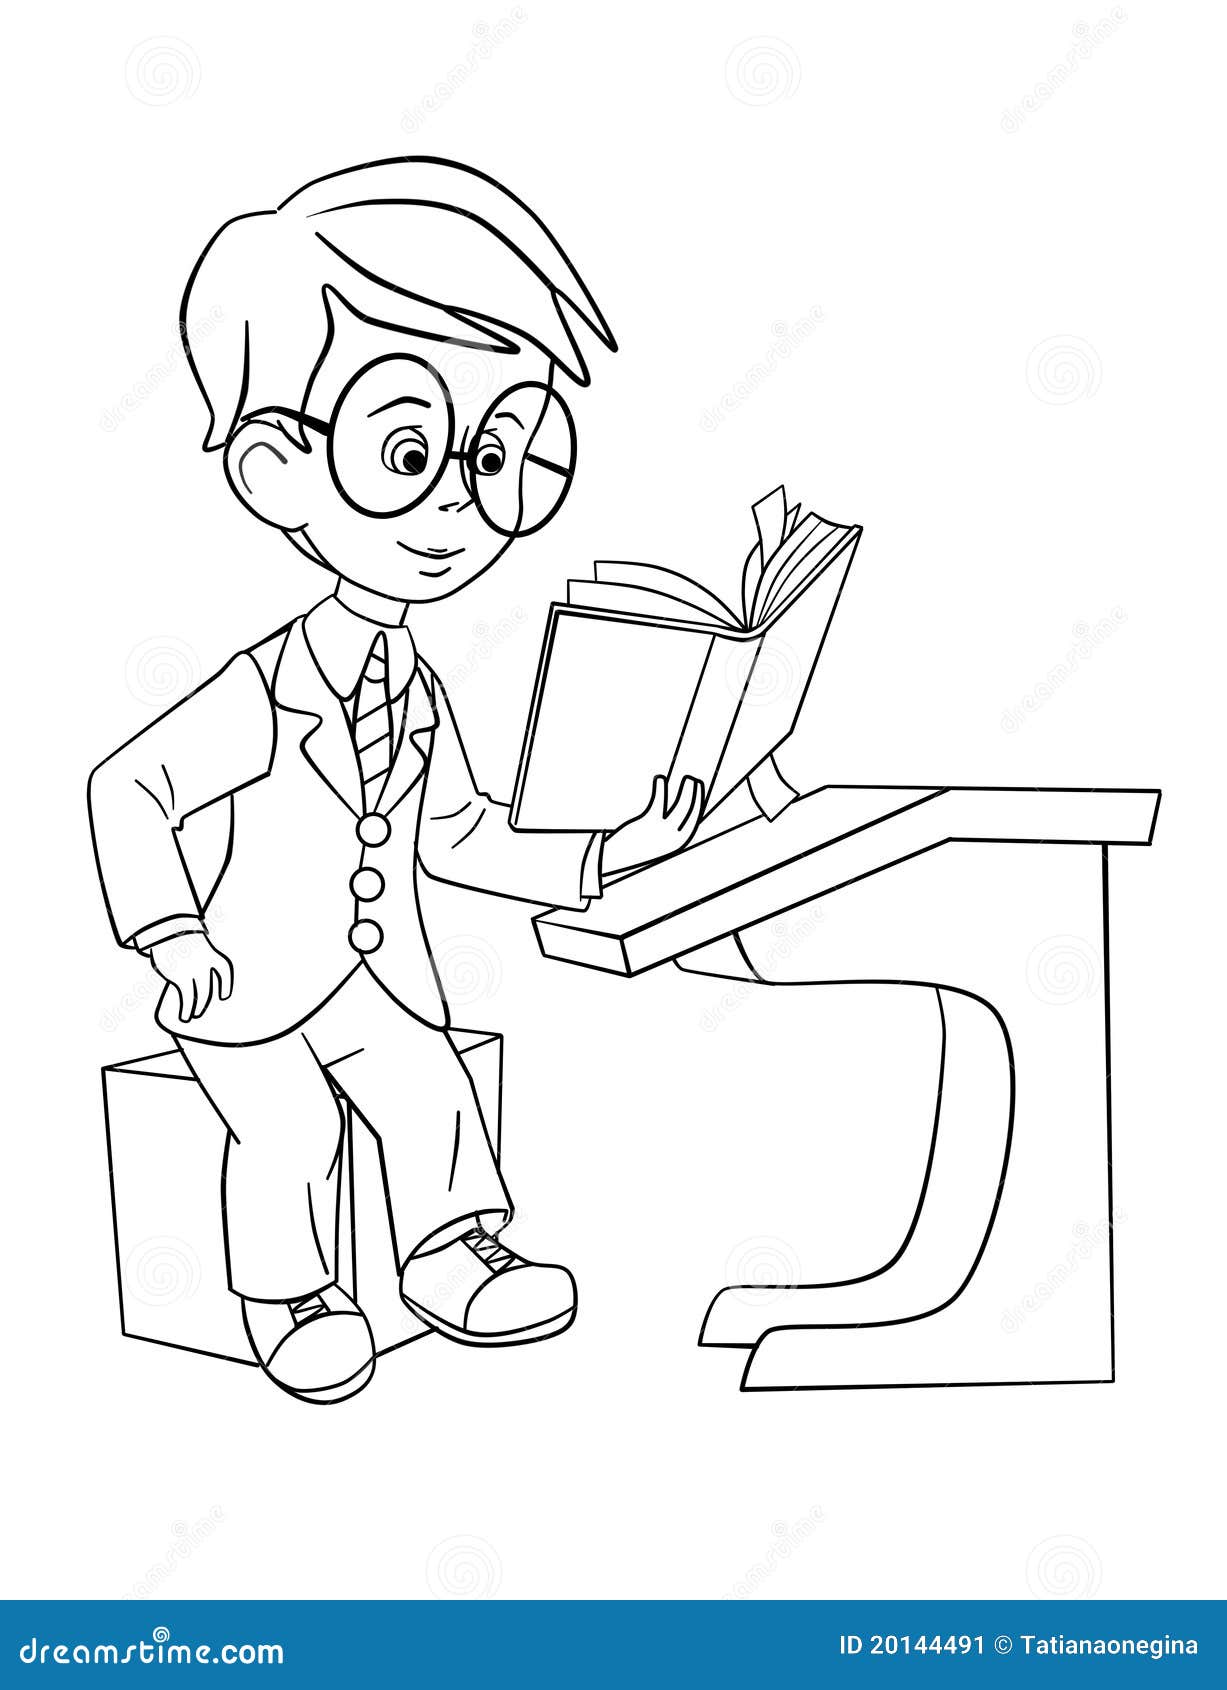 Schoolboy coloring page stock illustration. Illustration of ...